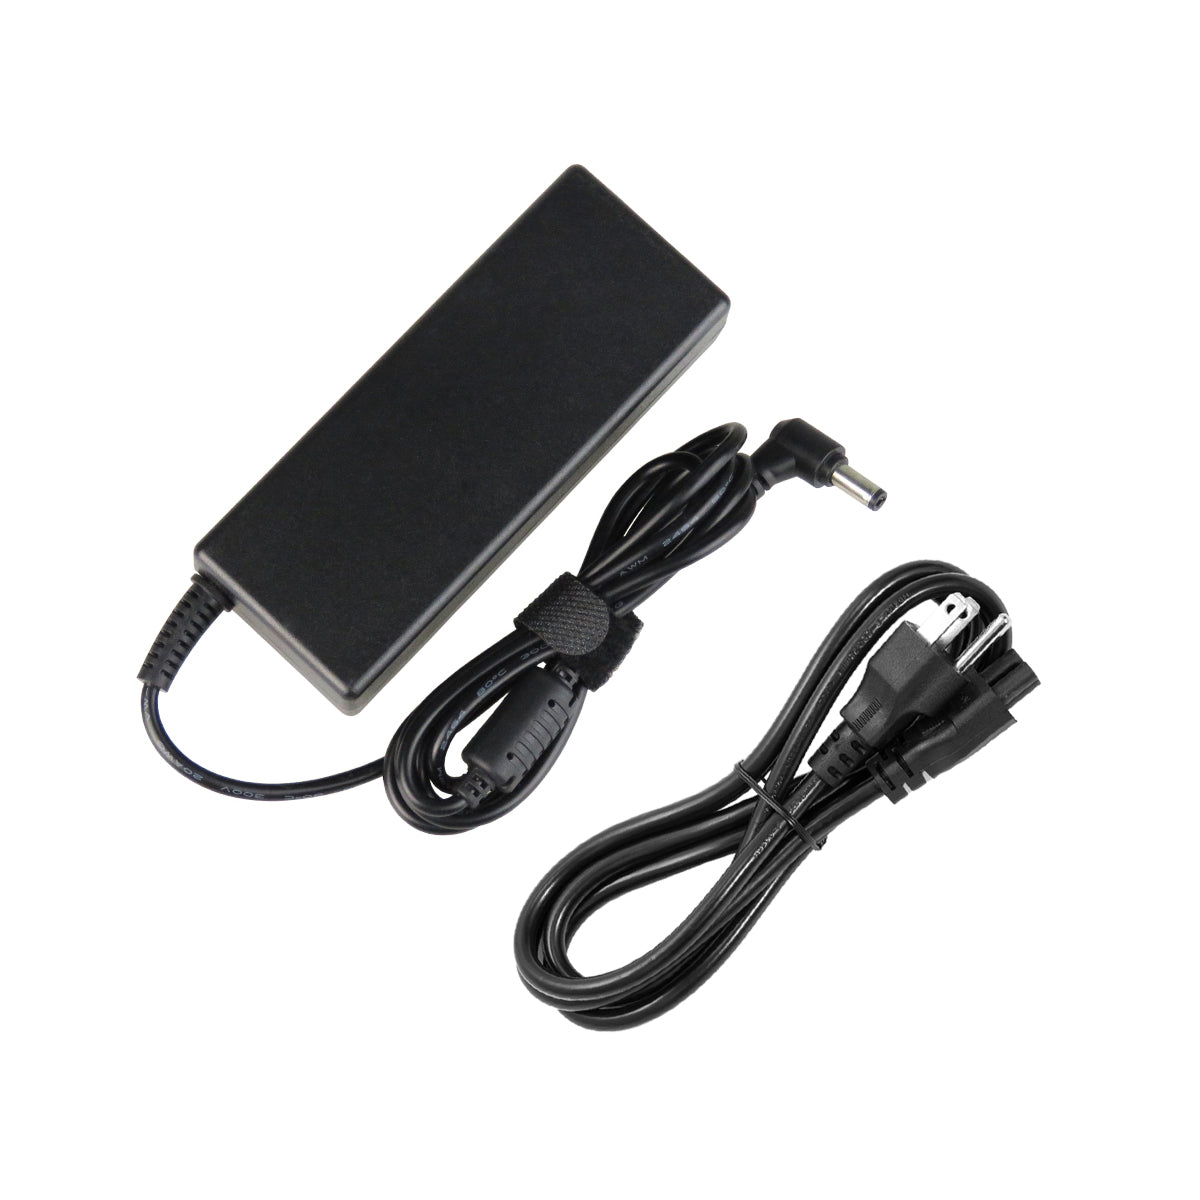 AC Adapter Charger for ASUS X551CA-DH31 Notebook.